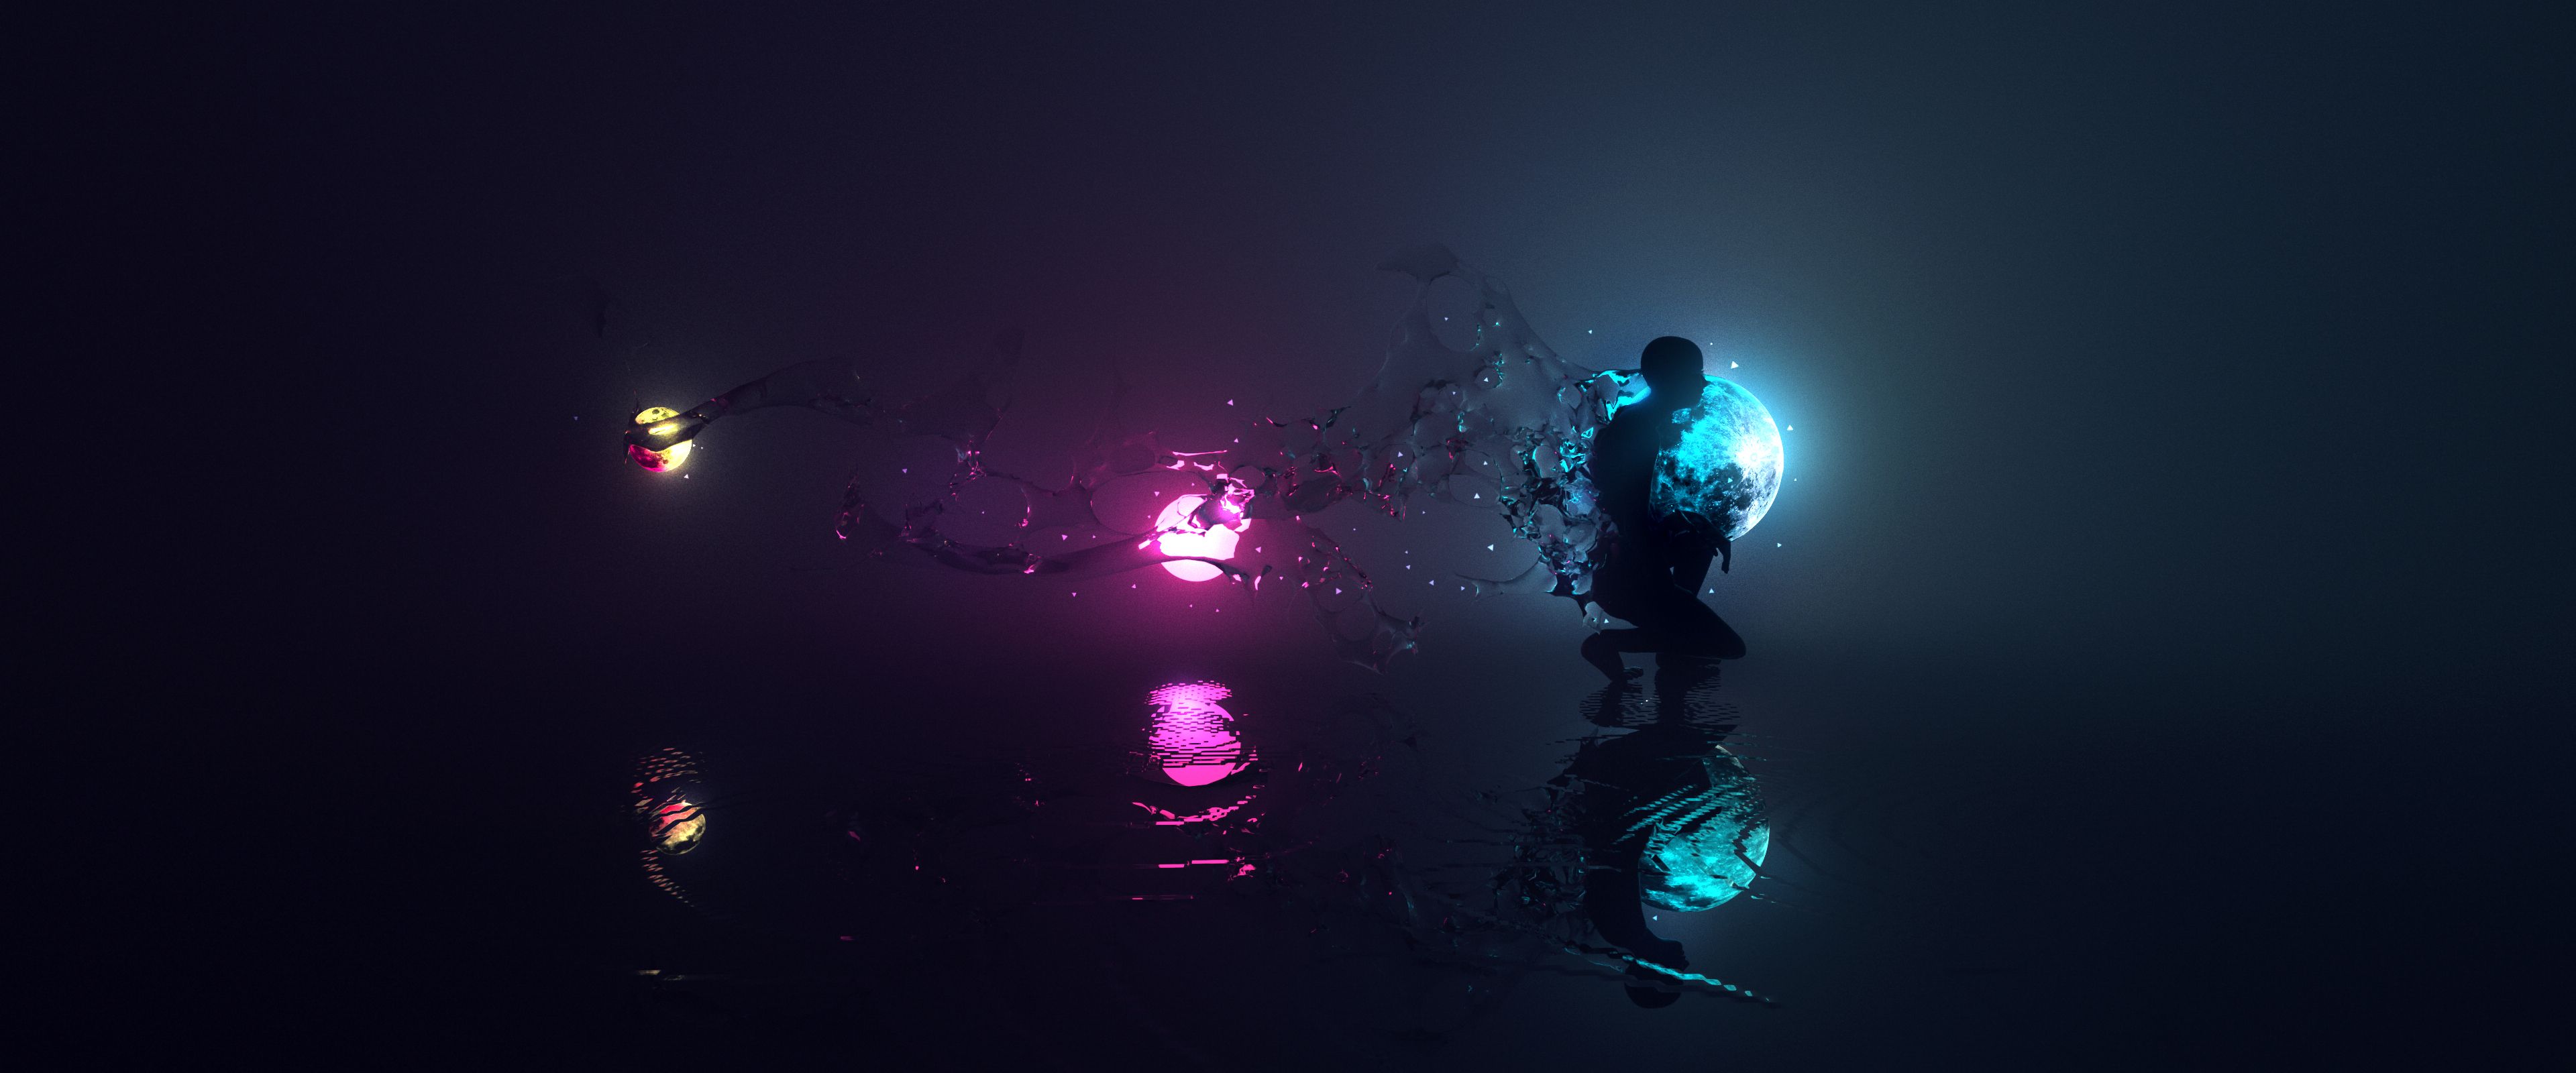 4K, Neon lights, Reflections, Silhouette, Water